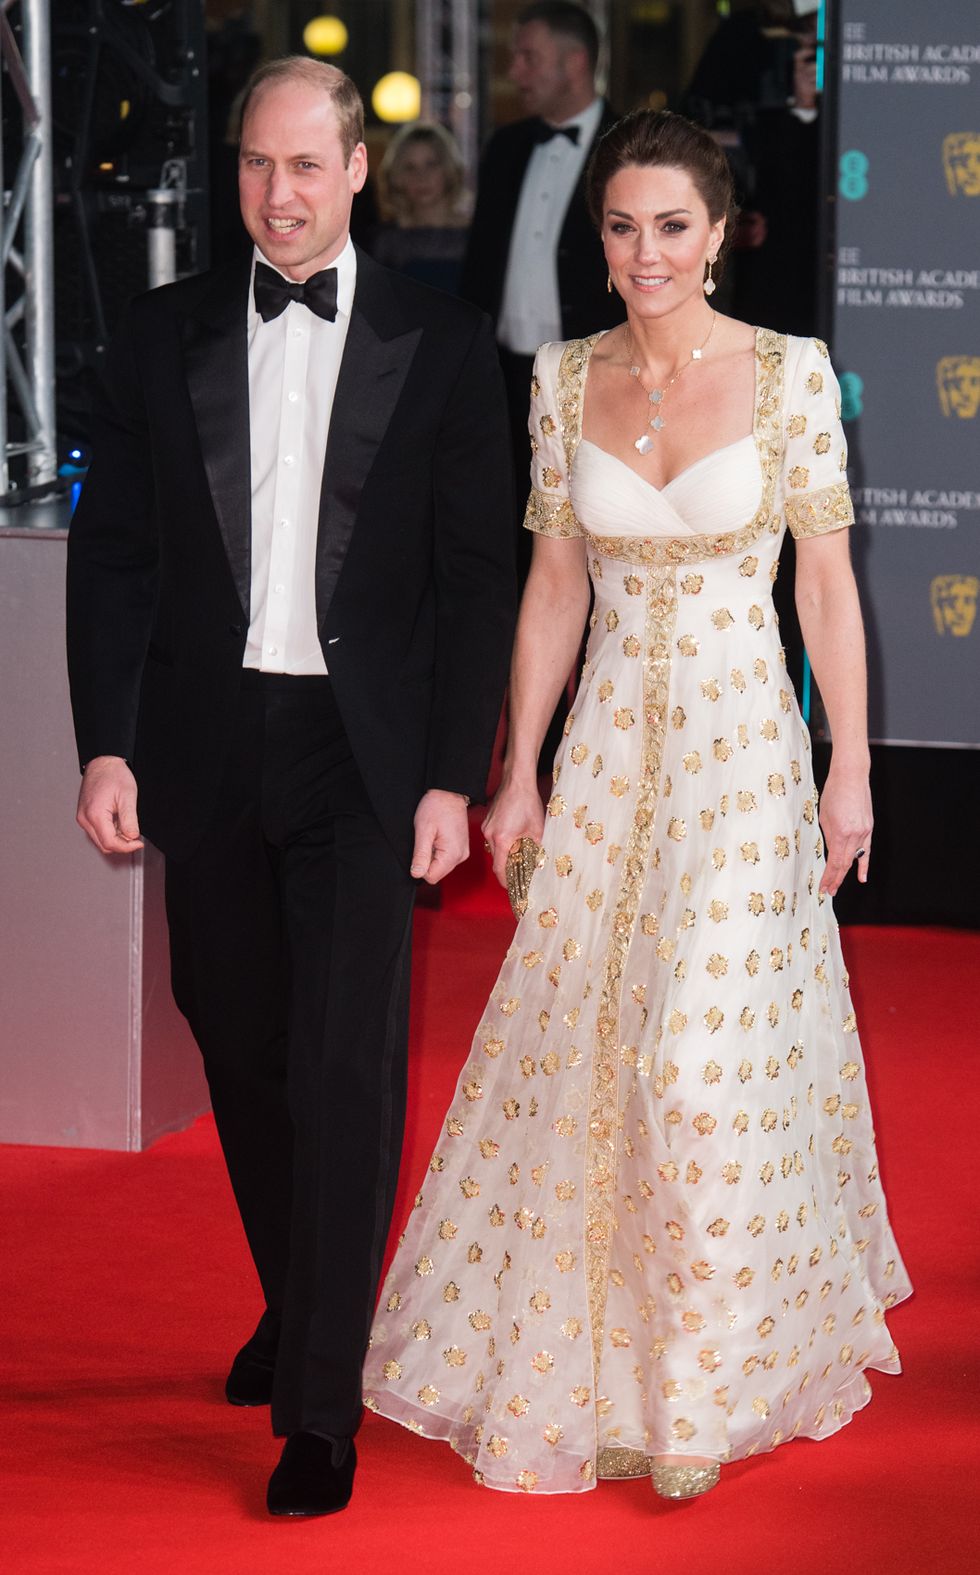 Kate Middleton Oozes Hollywood Glamour In Chic Black Gloves At BAFTAs 2023